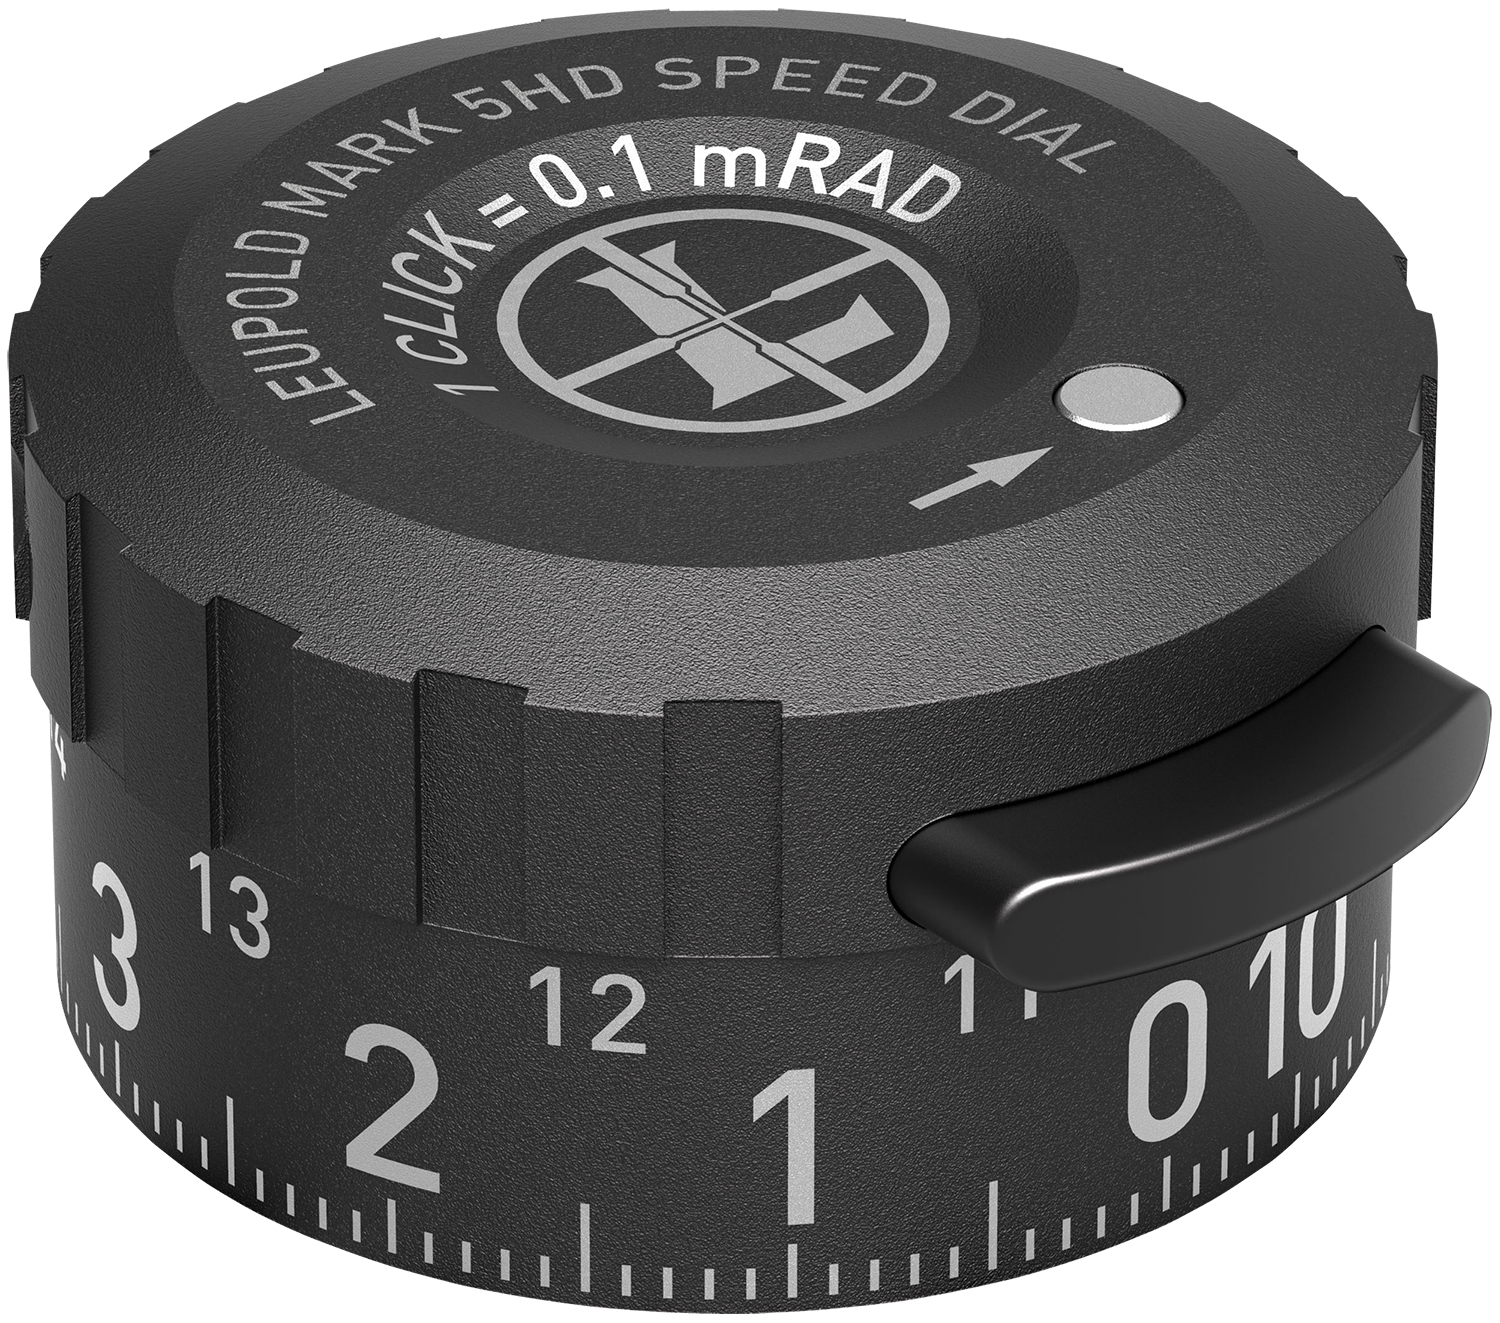 Leupold 182645 Mark 5 Competition Speed Dial Matte Black